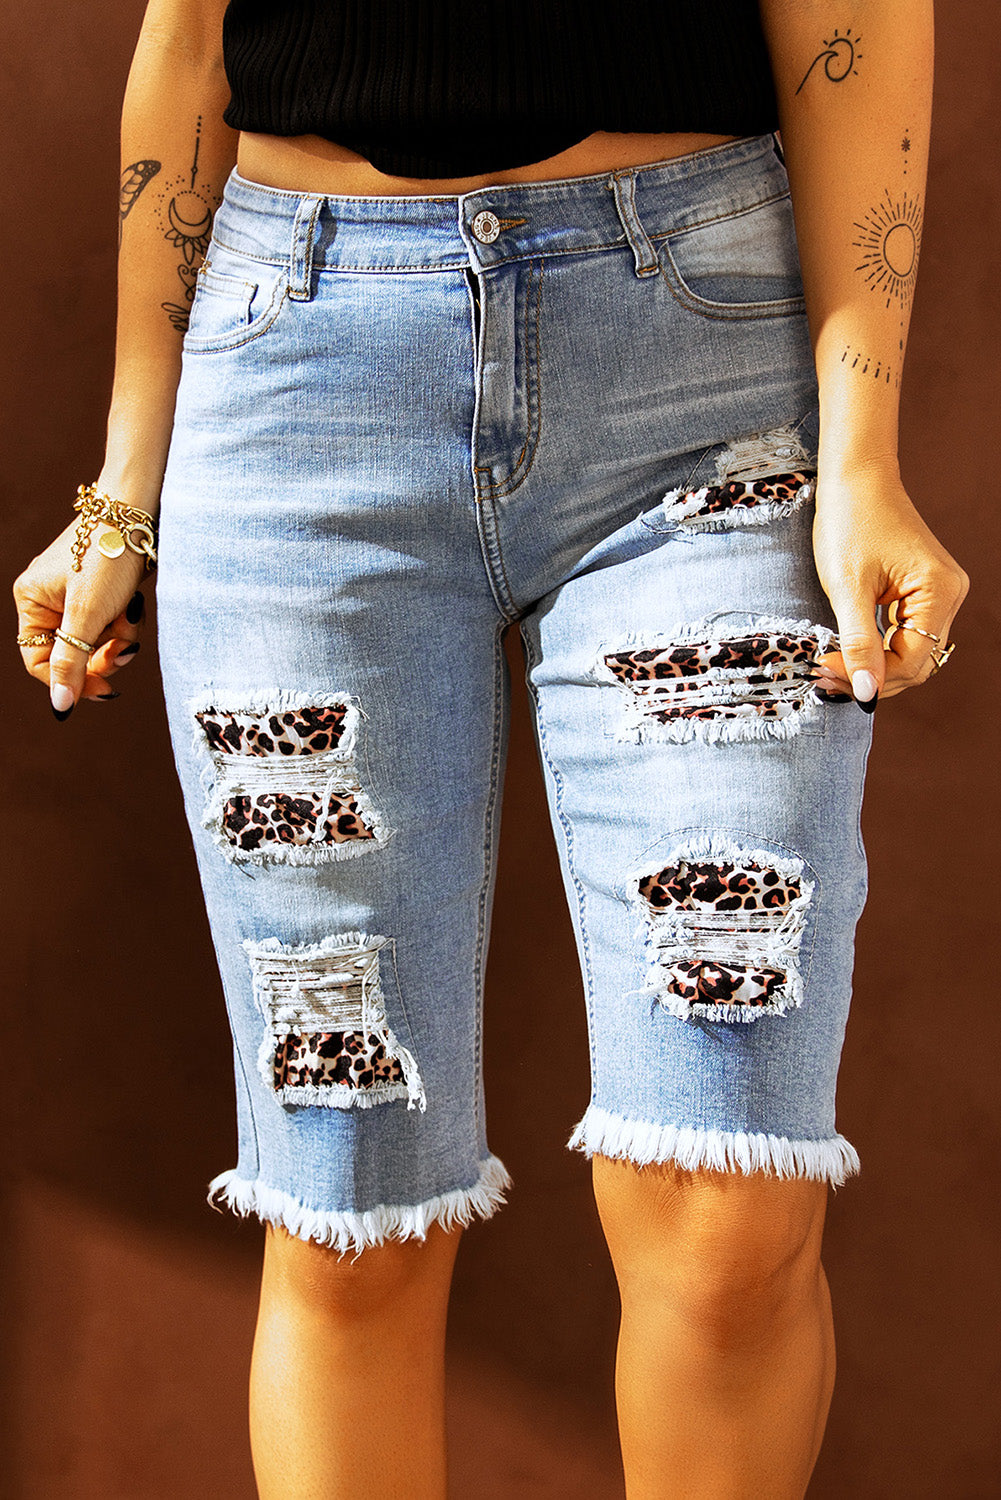 Leopard Mid Rise Ripped Destroyed Patches Bermuda Shorts Jeans LC781578-20